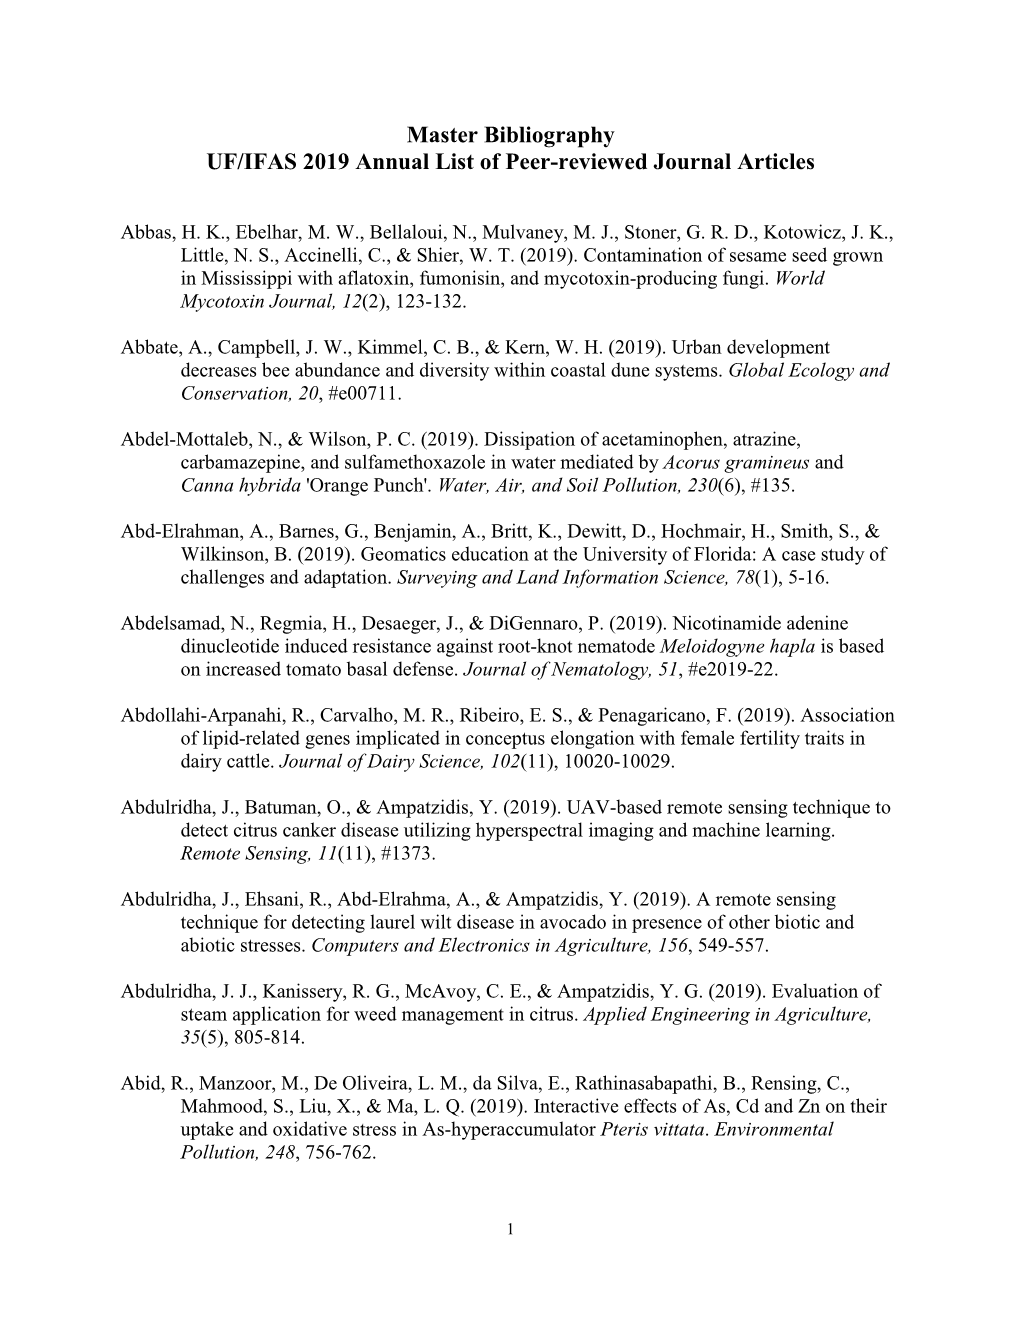 Master Bibliography UF/IFAS 2019 Annual List of Peer-Reviewed Journal Articles